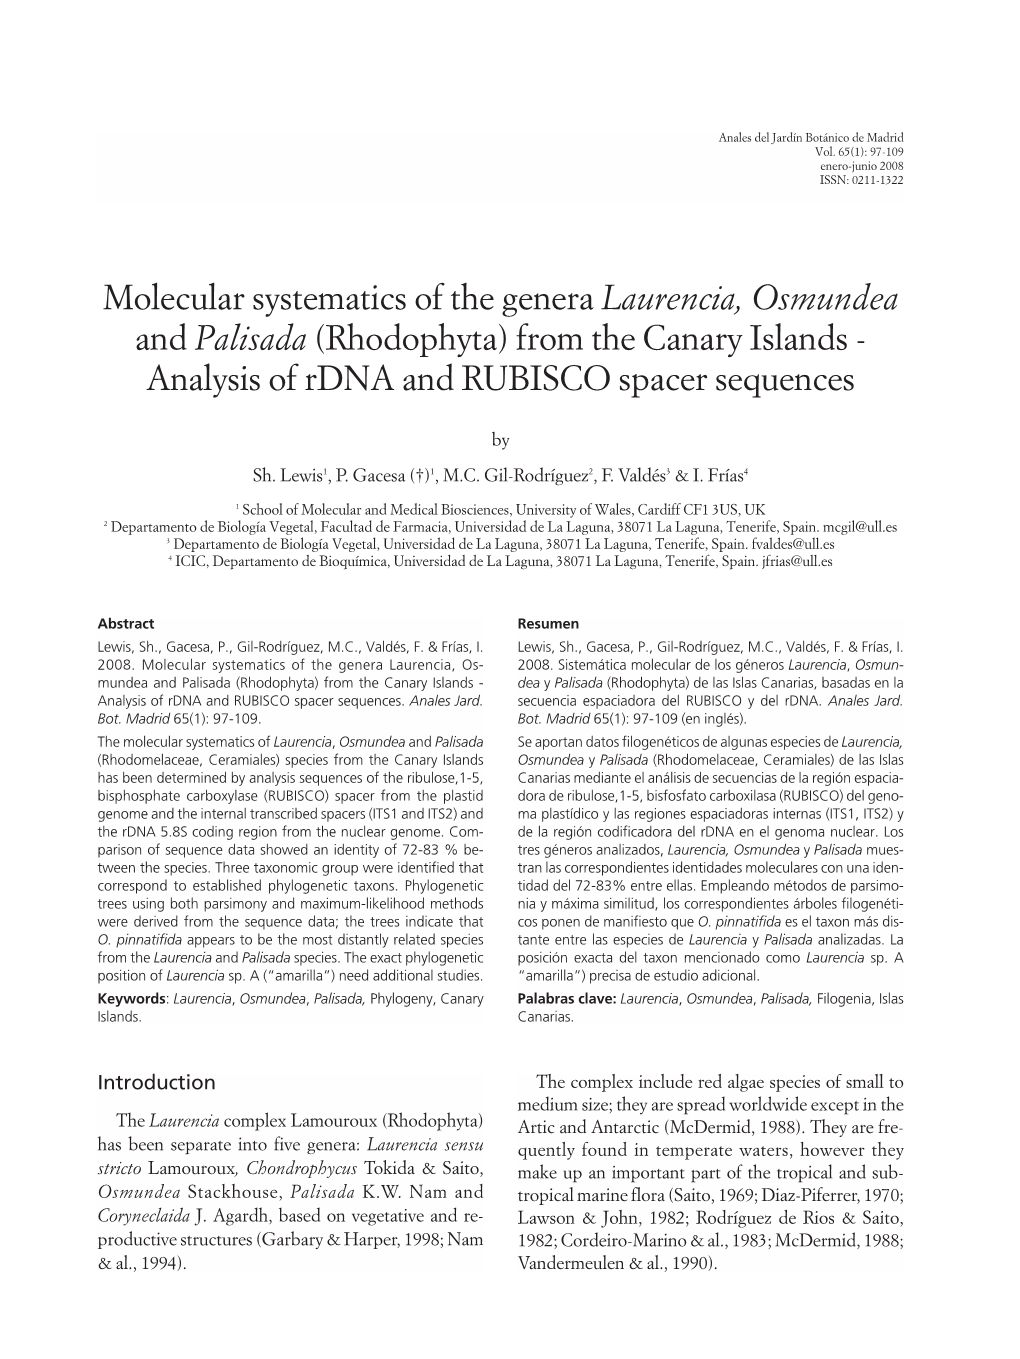 Laurencia, Osmundea and Palisada (Rhodophyta) from the Canary Islands - Analysis of Rdna and RUBISCO Spacer Sequences